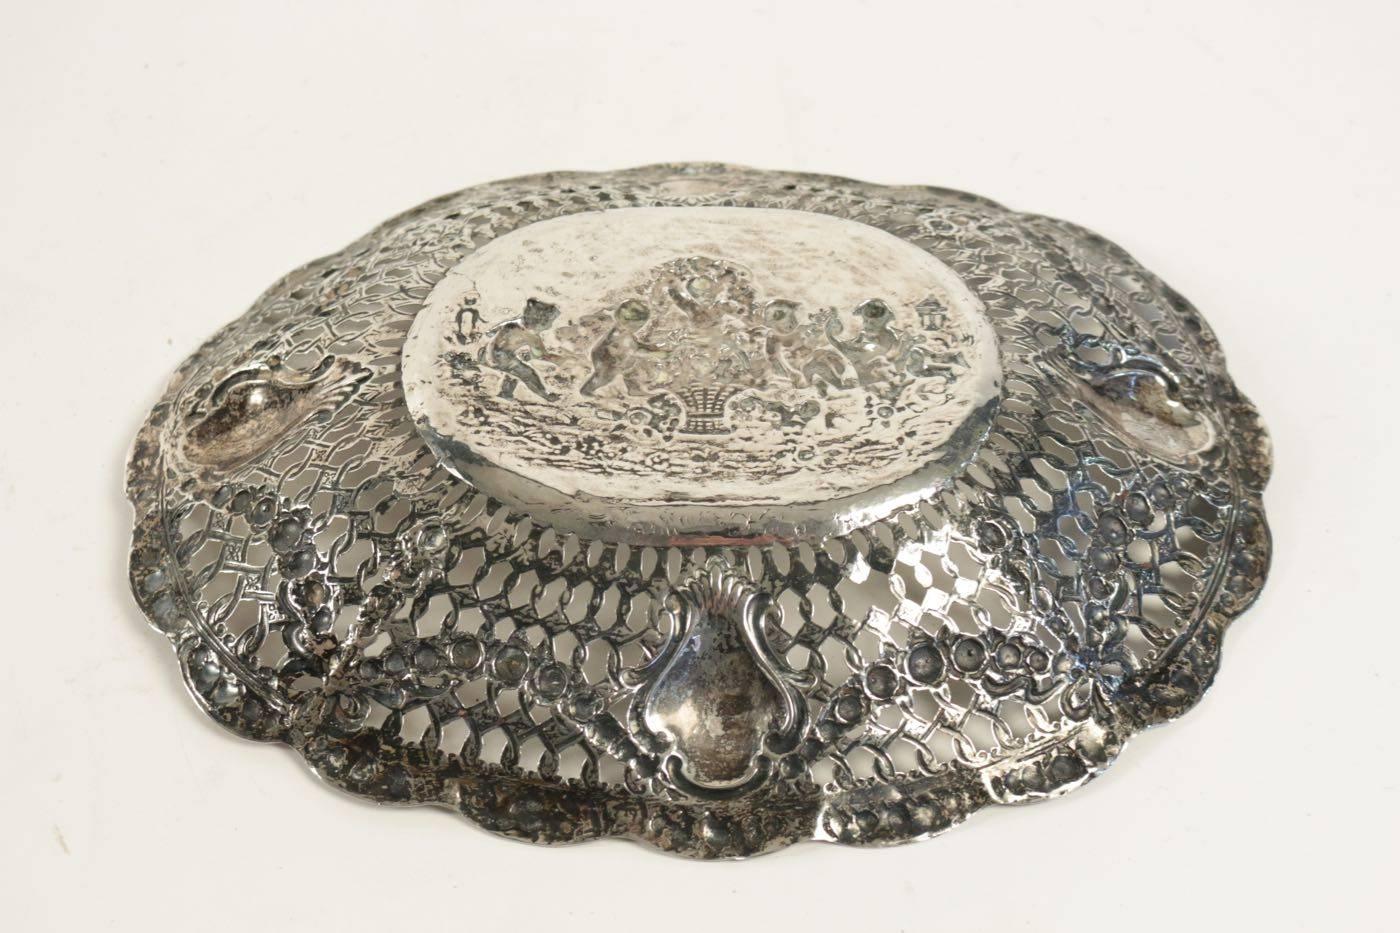 Repoussé 19th Century Sterling Silver Pierced Dish with Cherubs and Garlands of Flowers